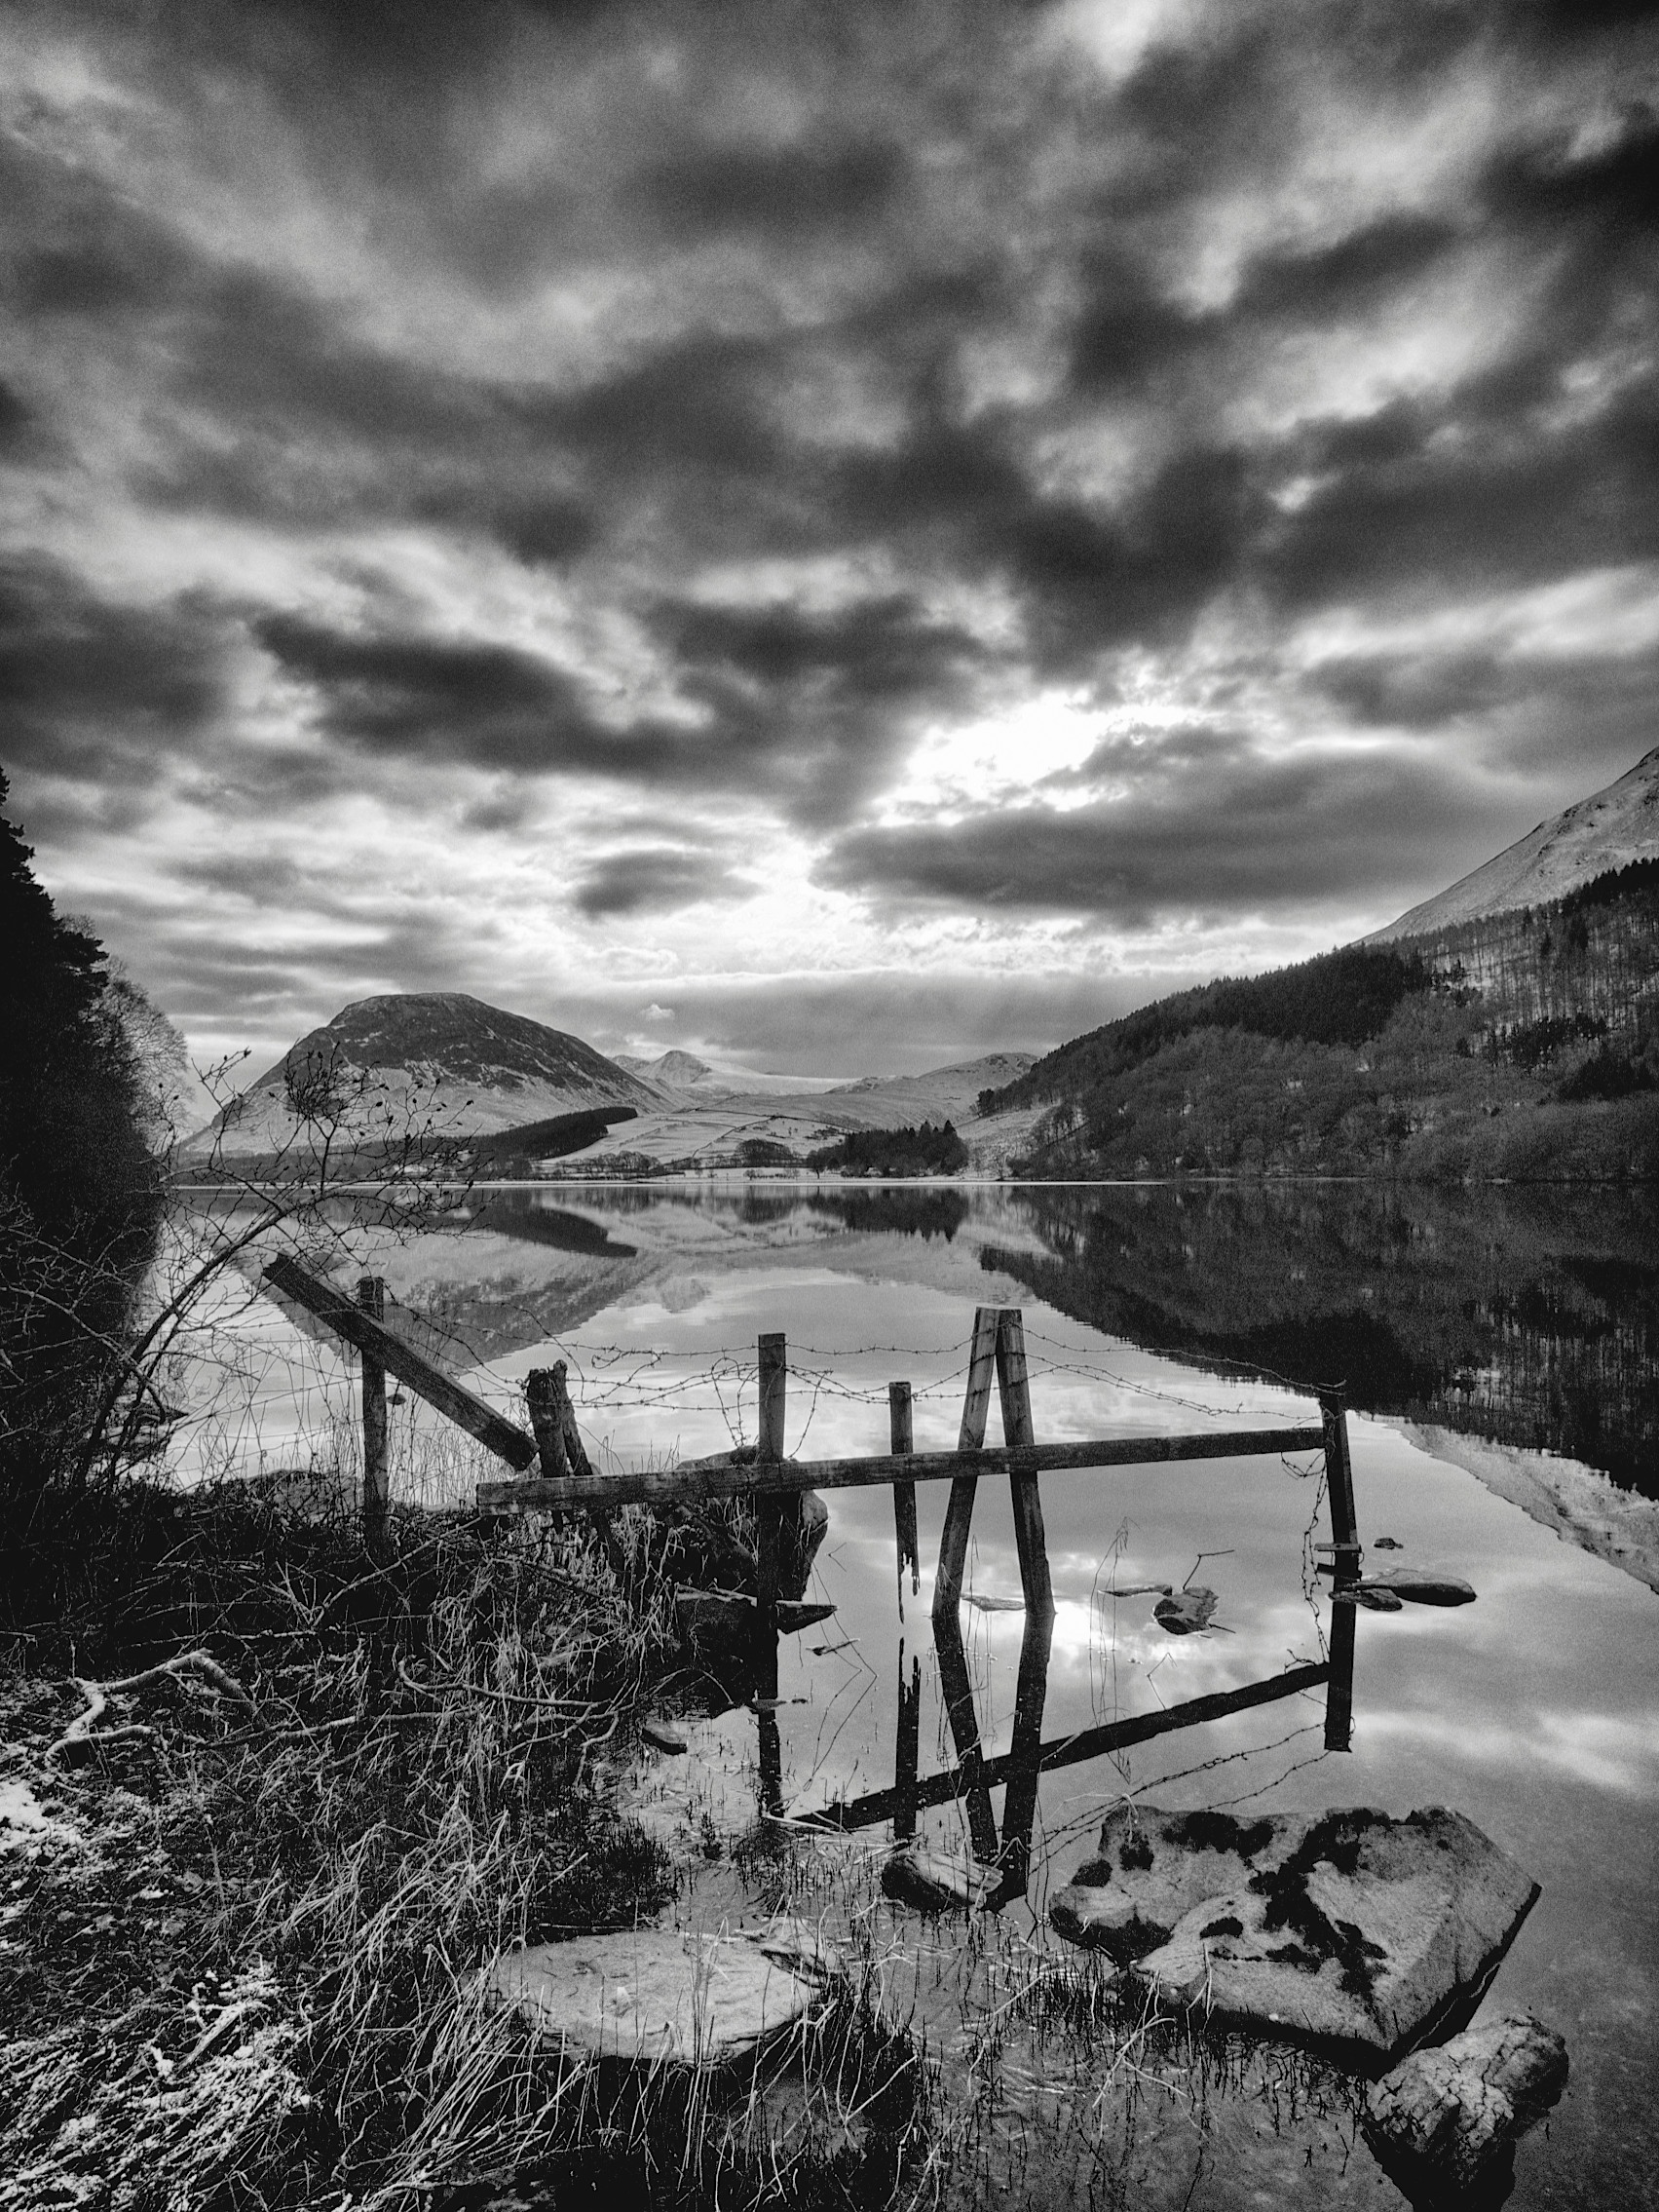    Loweswater   